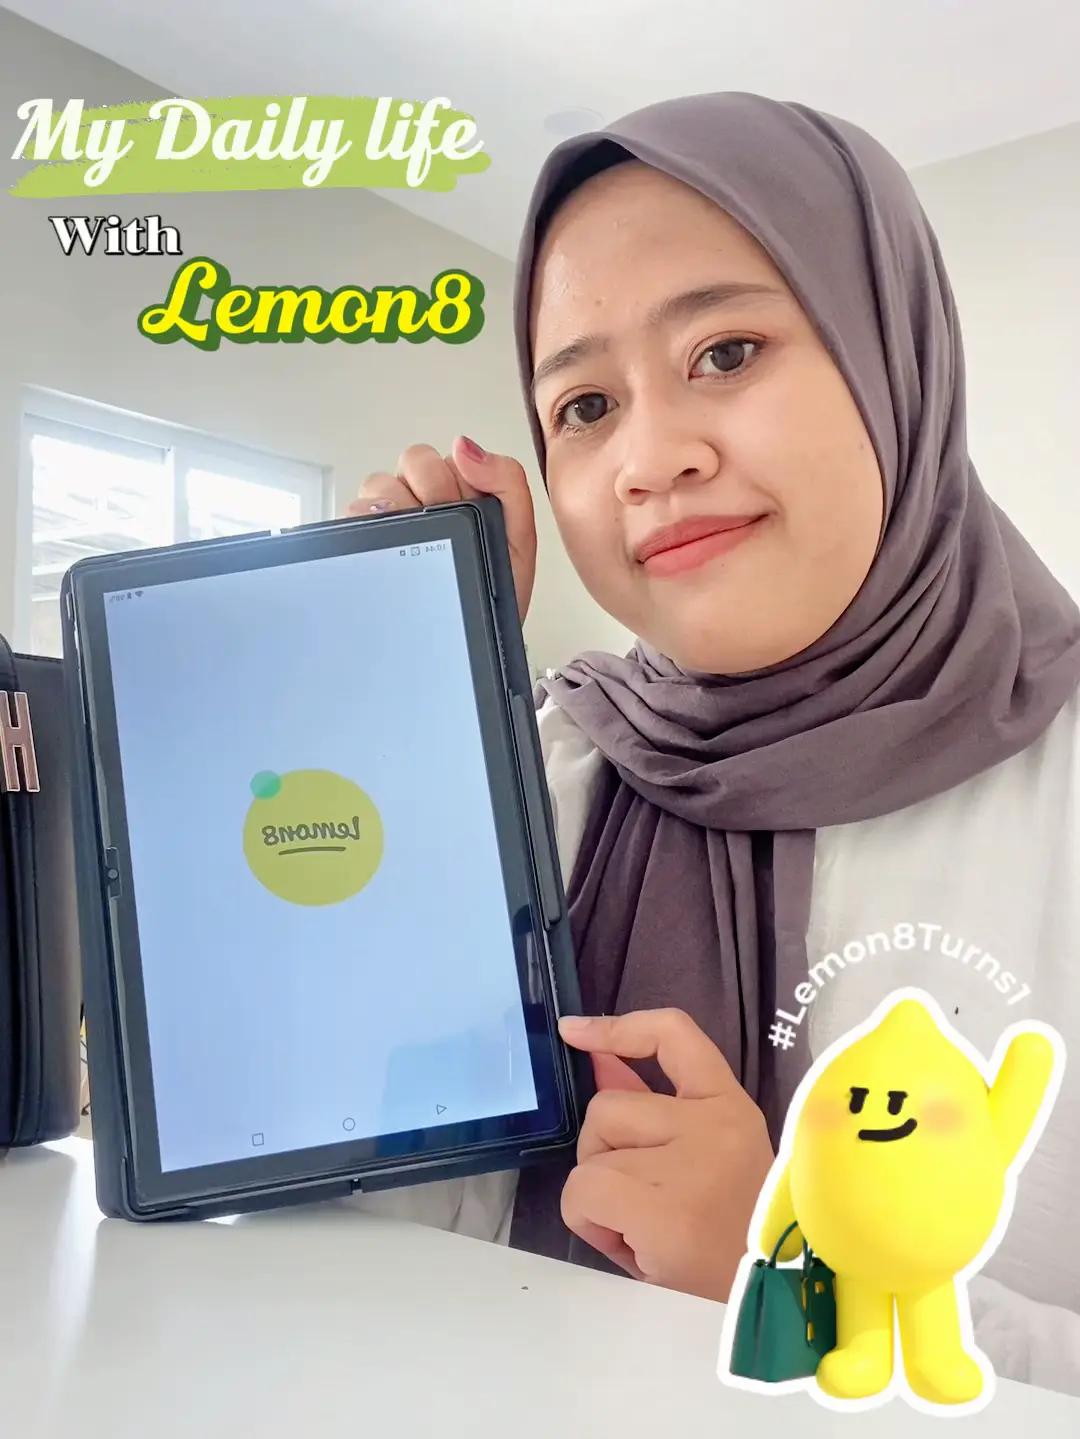 My daily life with Lemon8's images